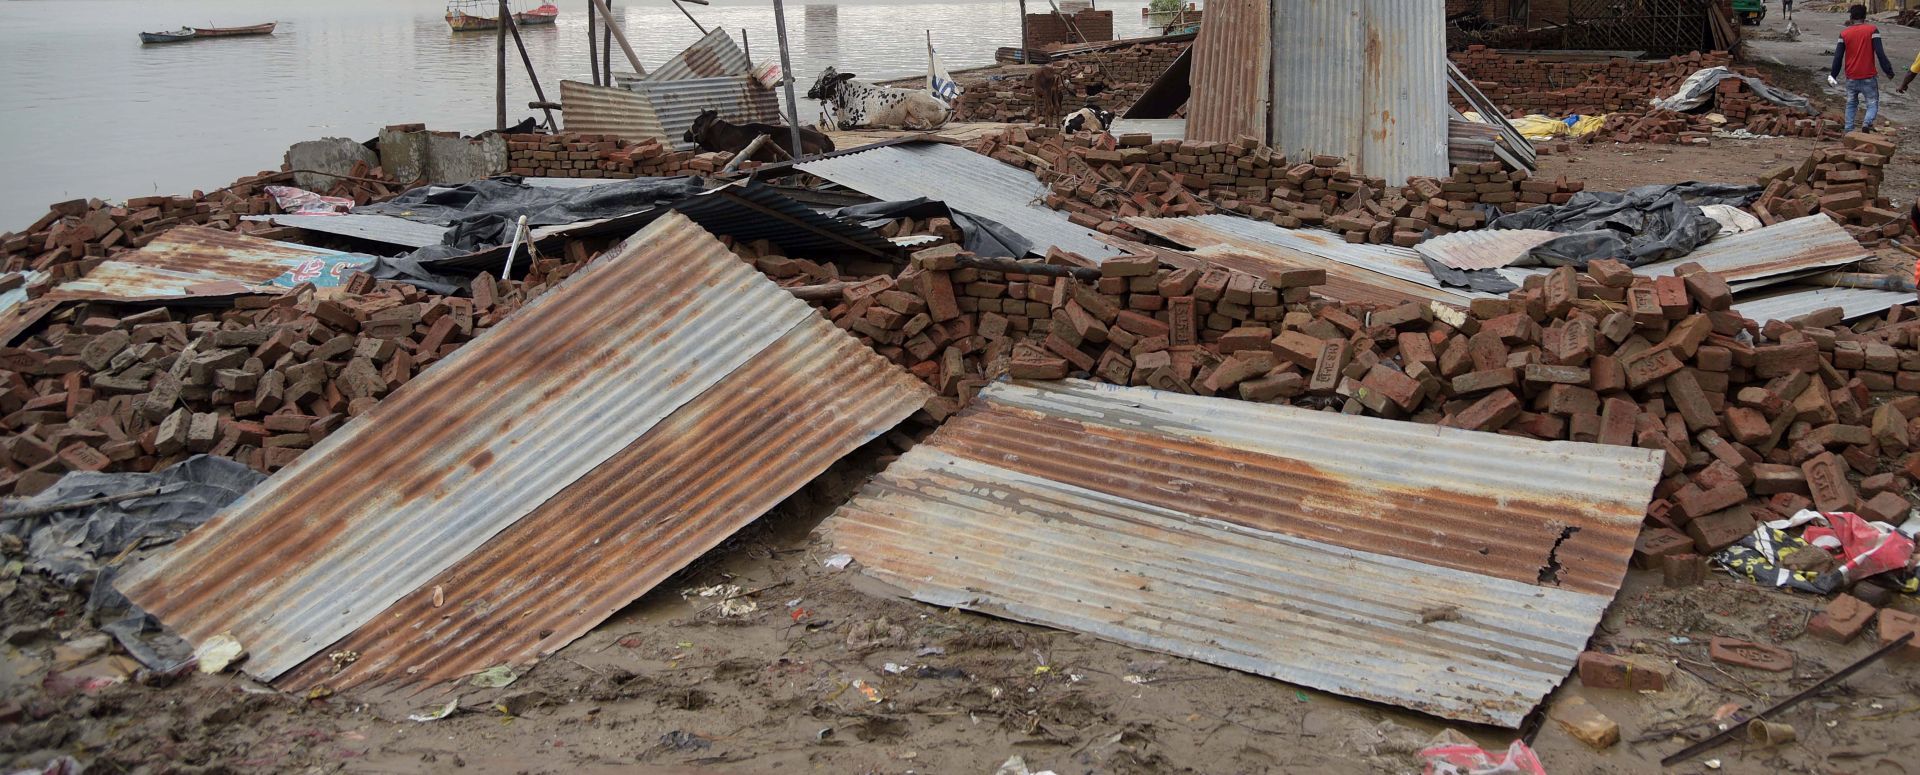 epa07879019 A damaged house due to the flooded water of river Ganga and Yamuna in Allahabad, Uttar Pradesh, India, 29 September 2019. According to the news reports, over eighty people have died in last four days in Bihar and Uttar Pradesh in rain related incidents after heavy rain brought flooding to low-lying areas.  EPA/STR